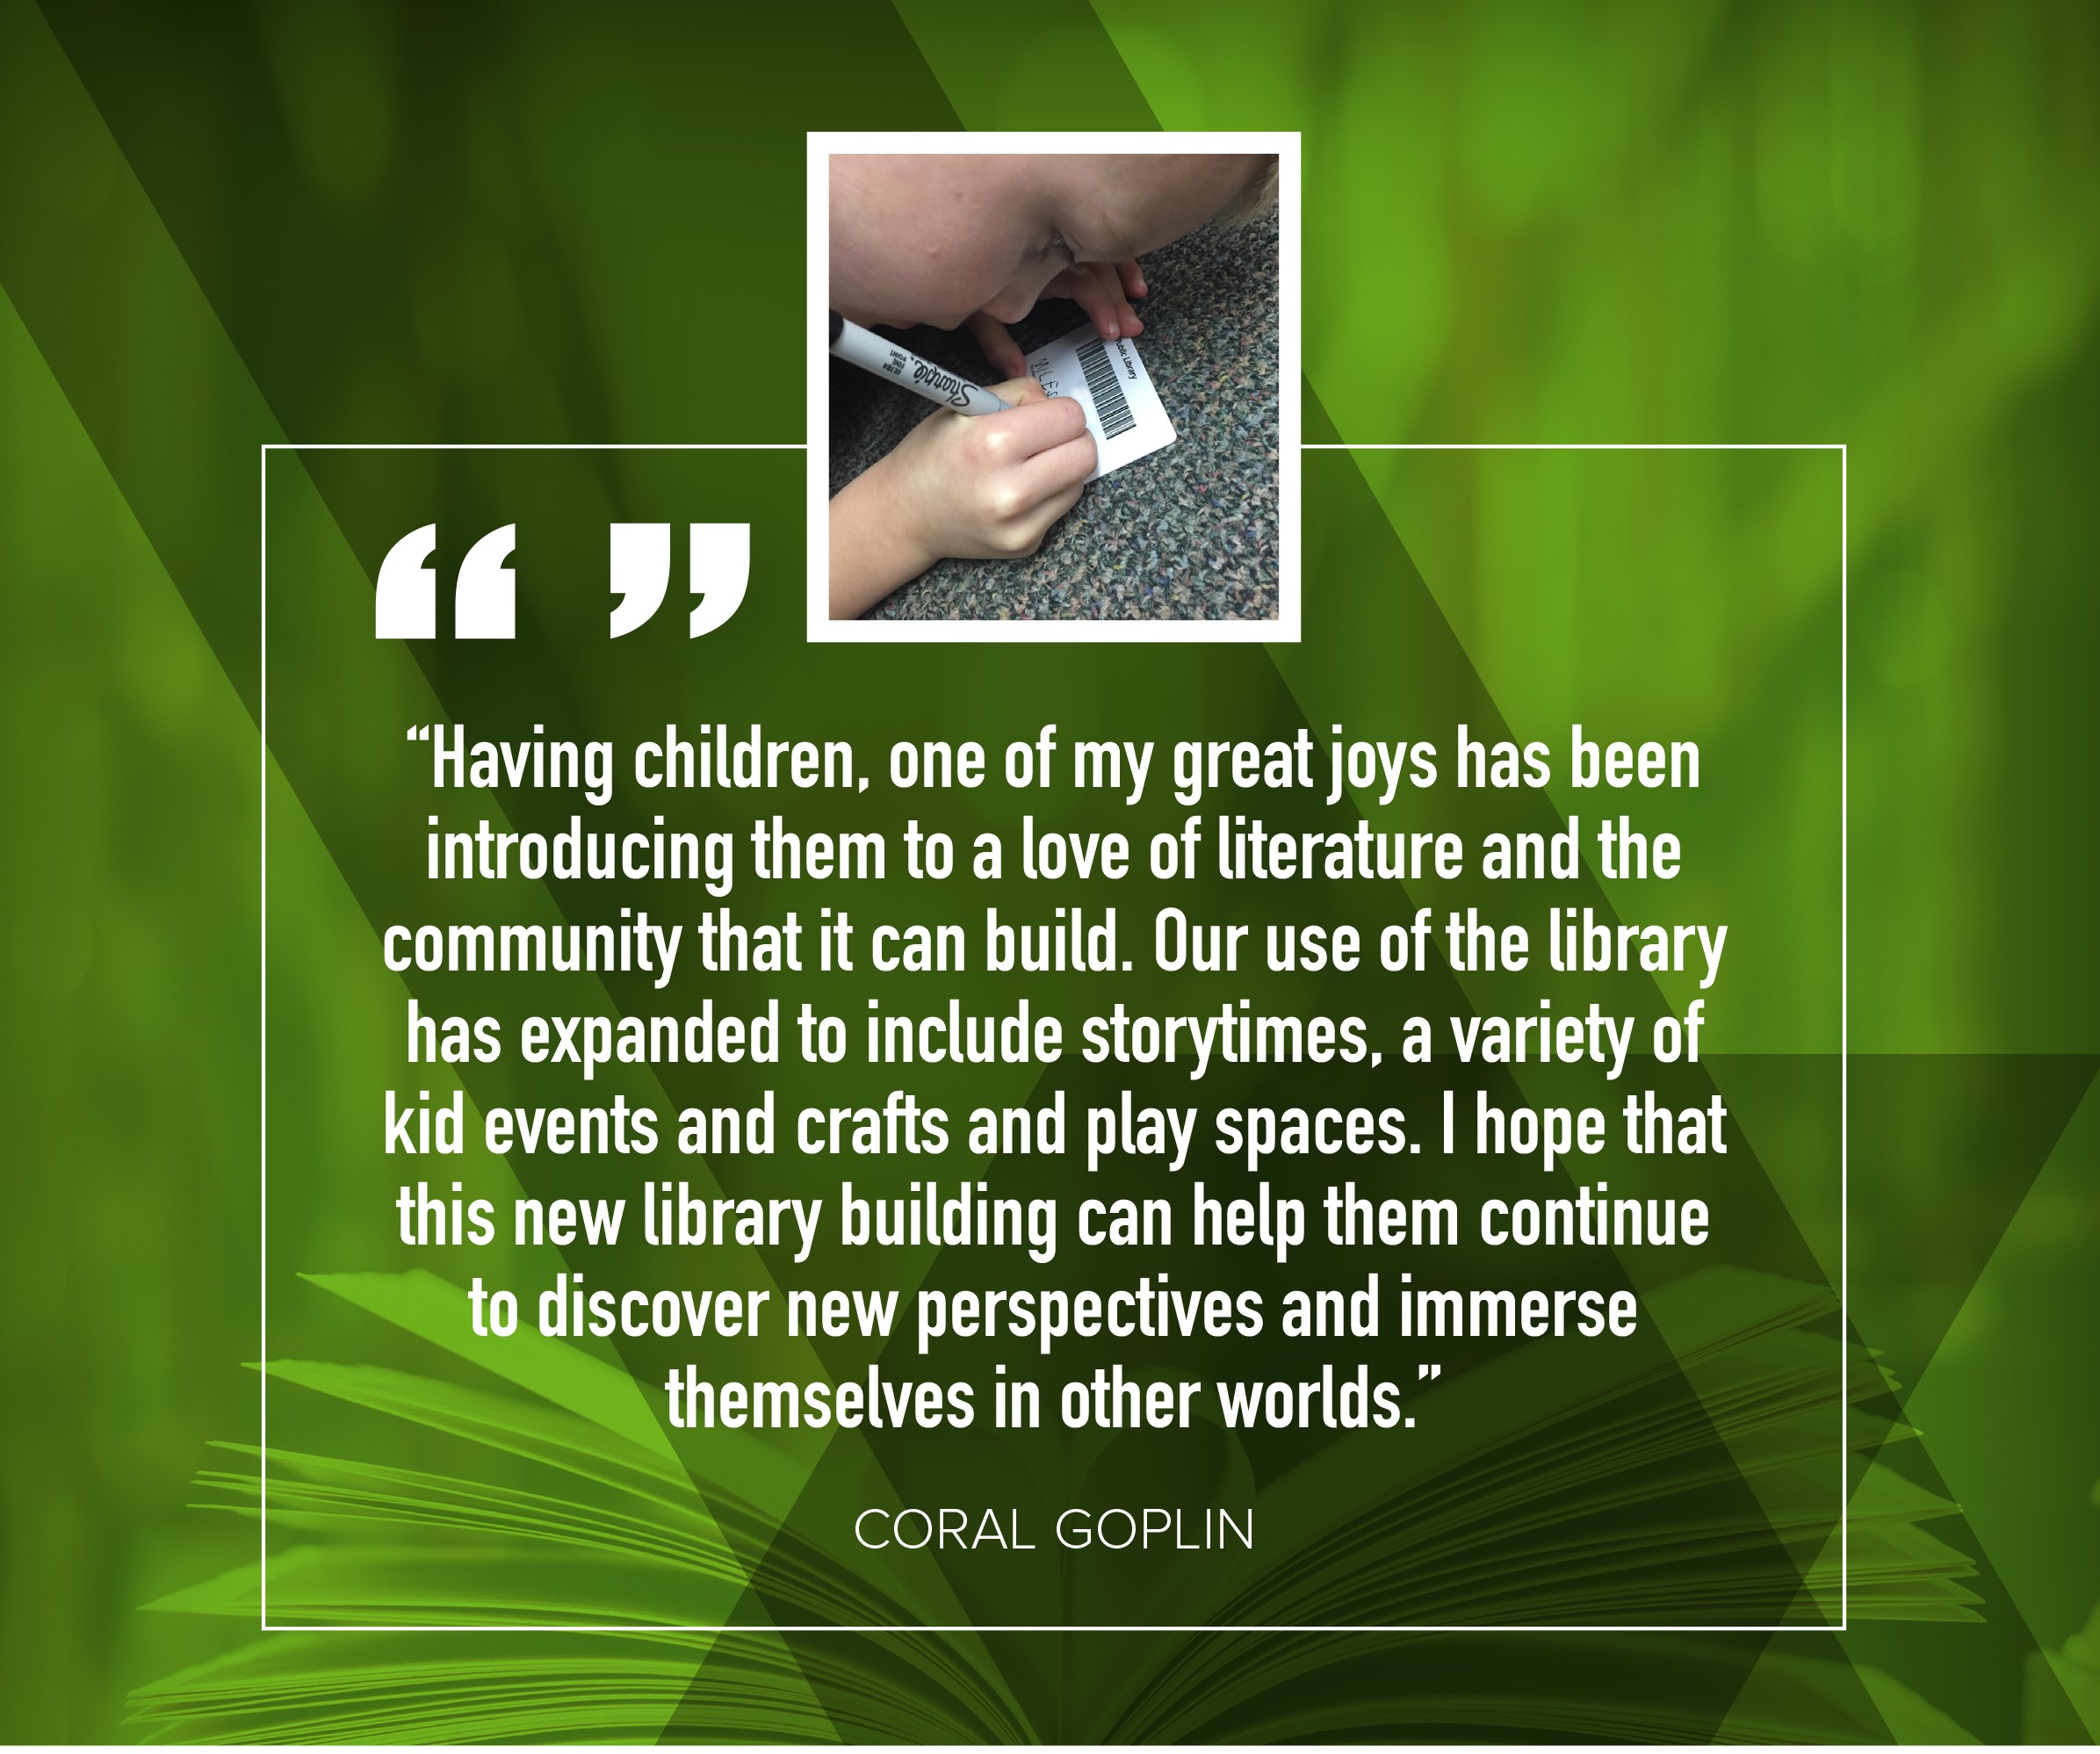 Coral Goplin "Having children, one of my great joys has been introducing them to a love of literature and the community that it can build.  Our use of the library has expanded to include storytimes, a variety of kid events and crafts and play spaces.  I hope that this new lbirary buiding can help them continue to discover new perspectives and immerse themselves in other worlds."